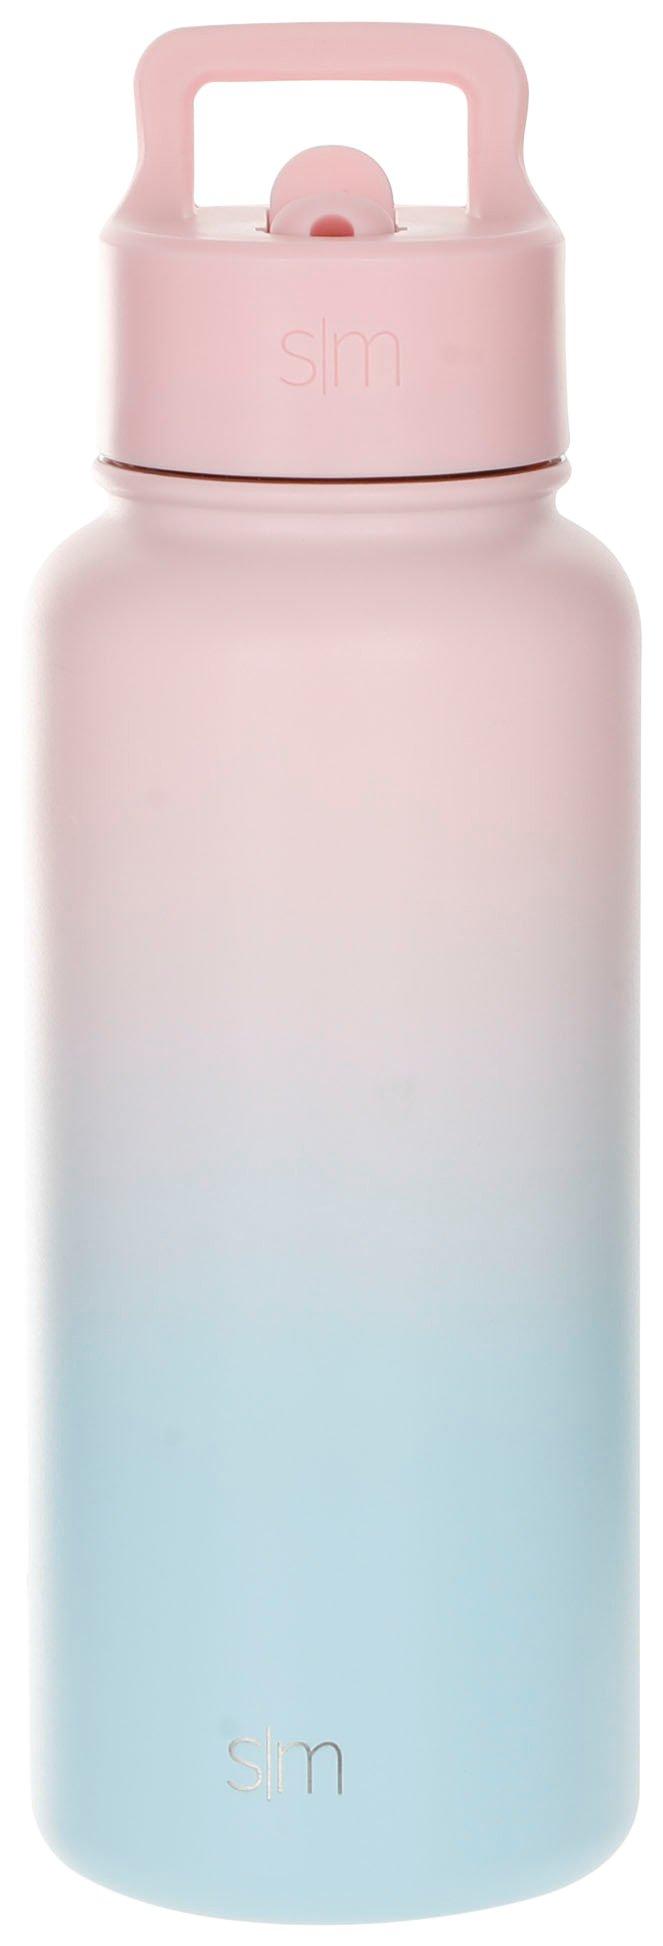 34oz Cotton Candy Summit Stainless Steel Water Bottle